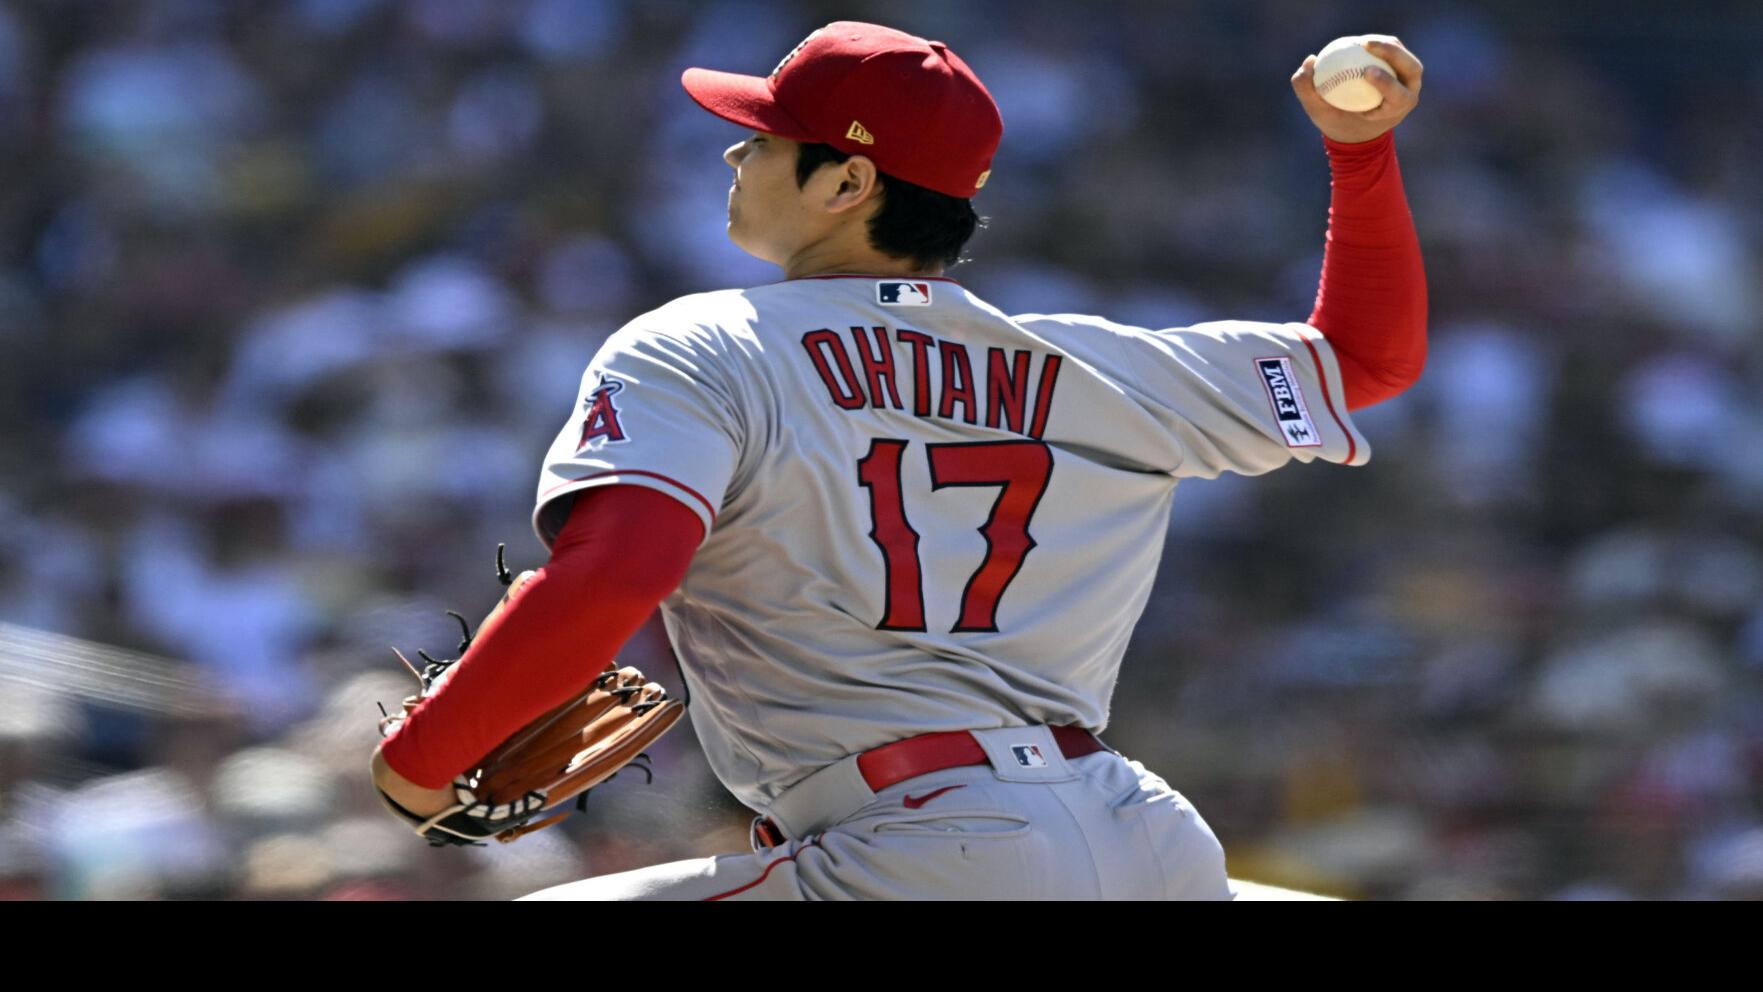 Angels star Shohei Ohtani finishes with the best-selling jersey in MLB this  season, National News